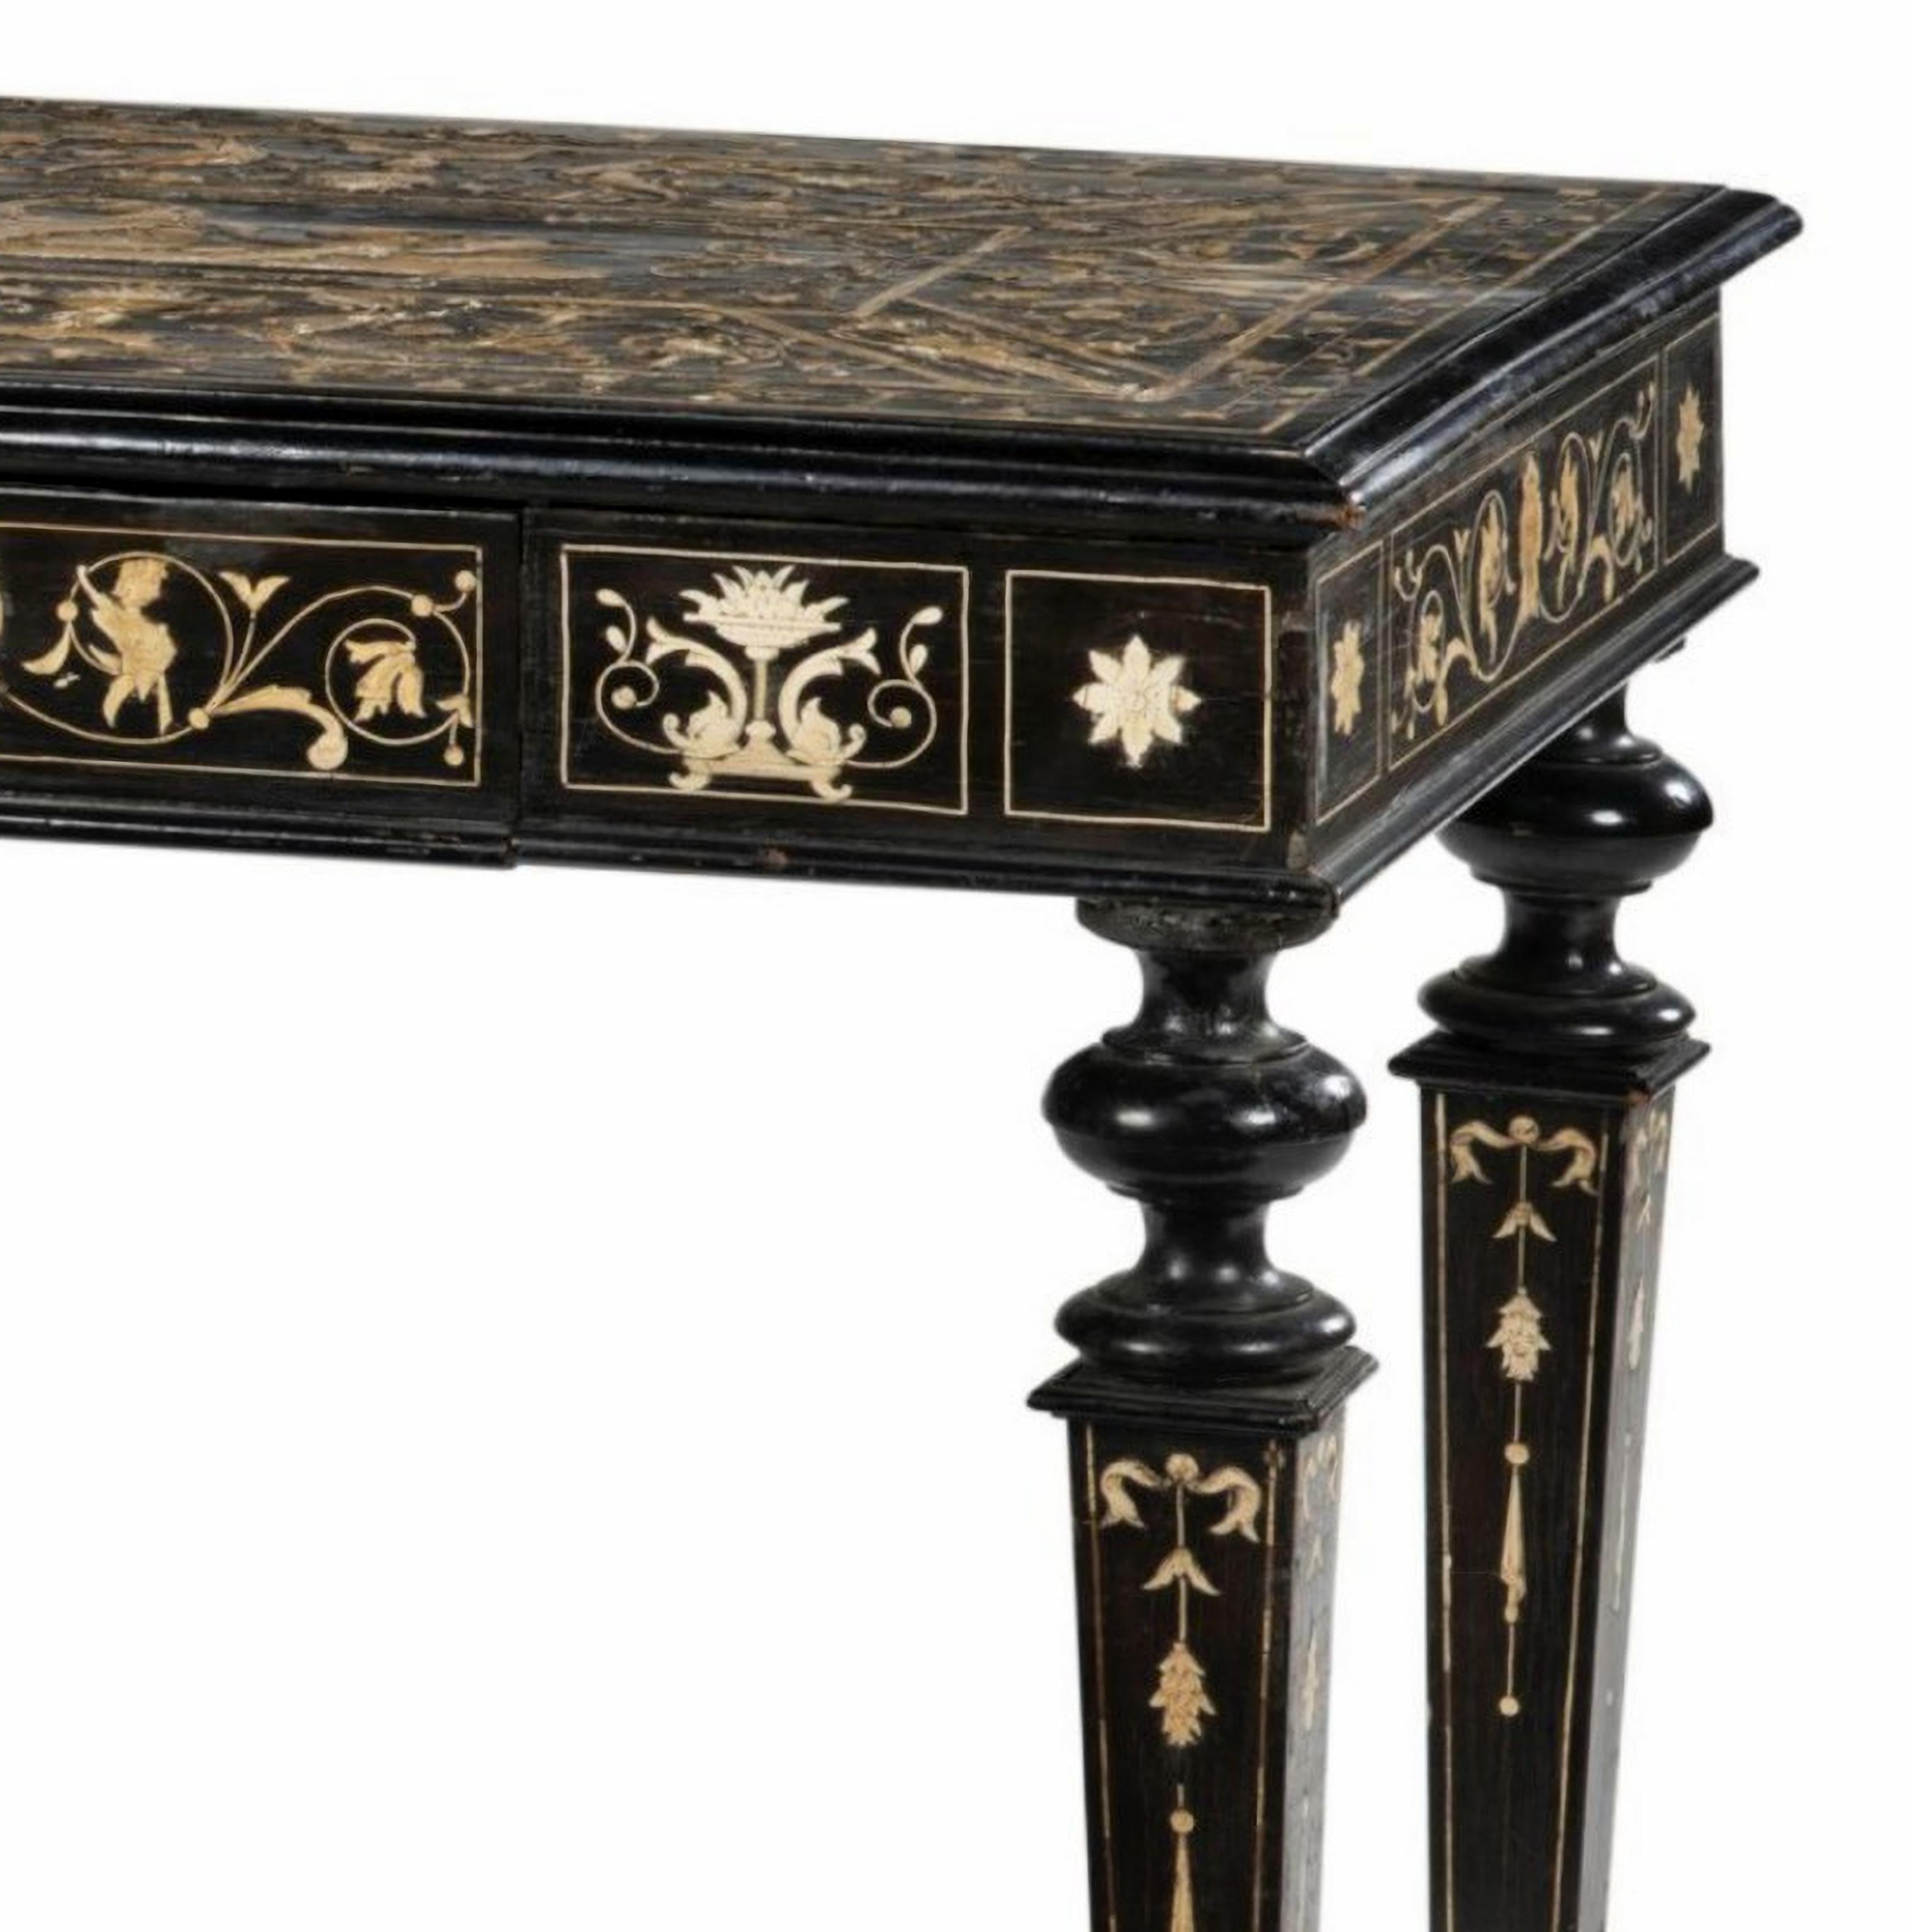 Italian Table in Ebonized Wood and Engraved Inlays 19th Century
Milan-Italy
rectangular in shape, opening to a drawer, with arabesque decoration of stylized foliage, chimera and vases; some restorations and losses.
Nineteenth century.
H: 73 cm, L: